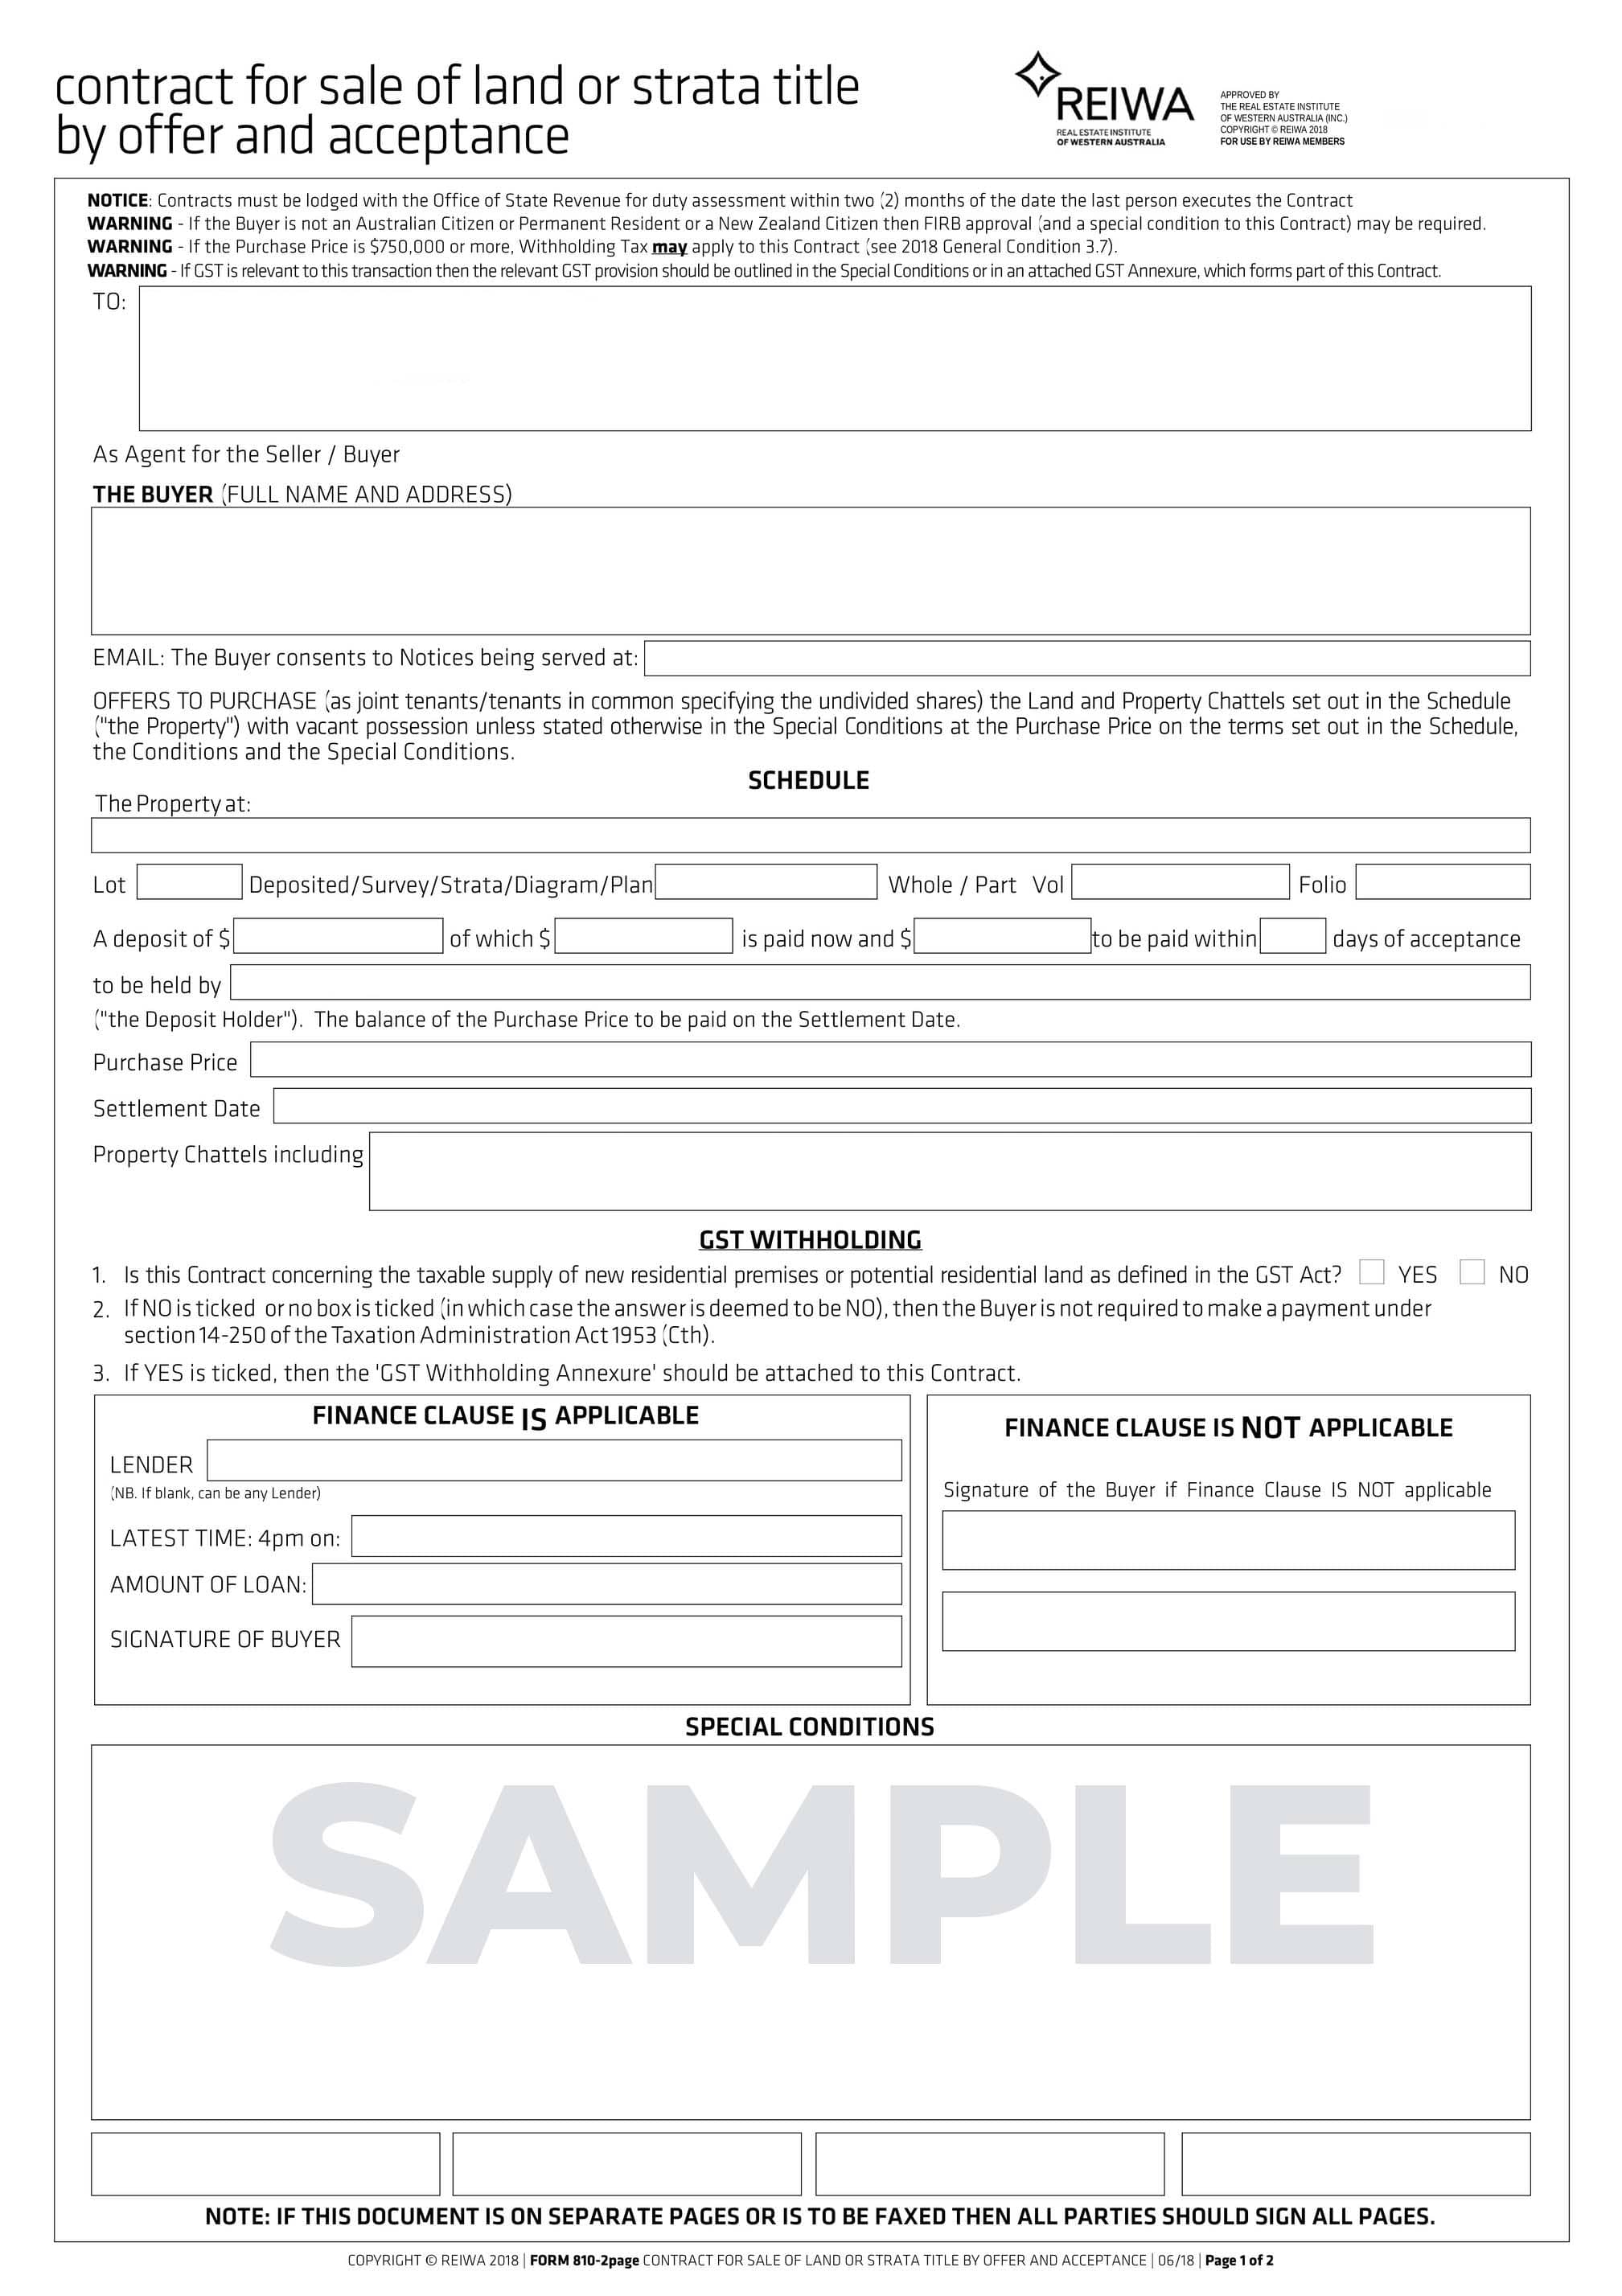 Offer and Acceptance Form